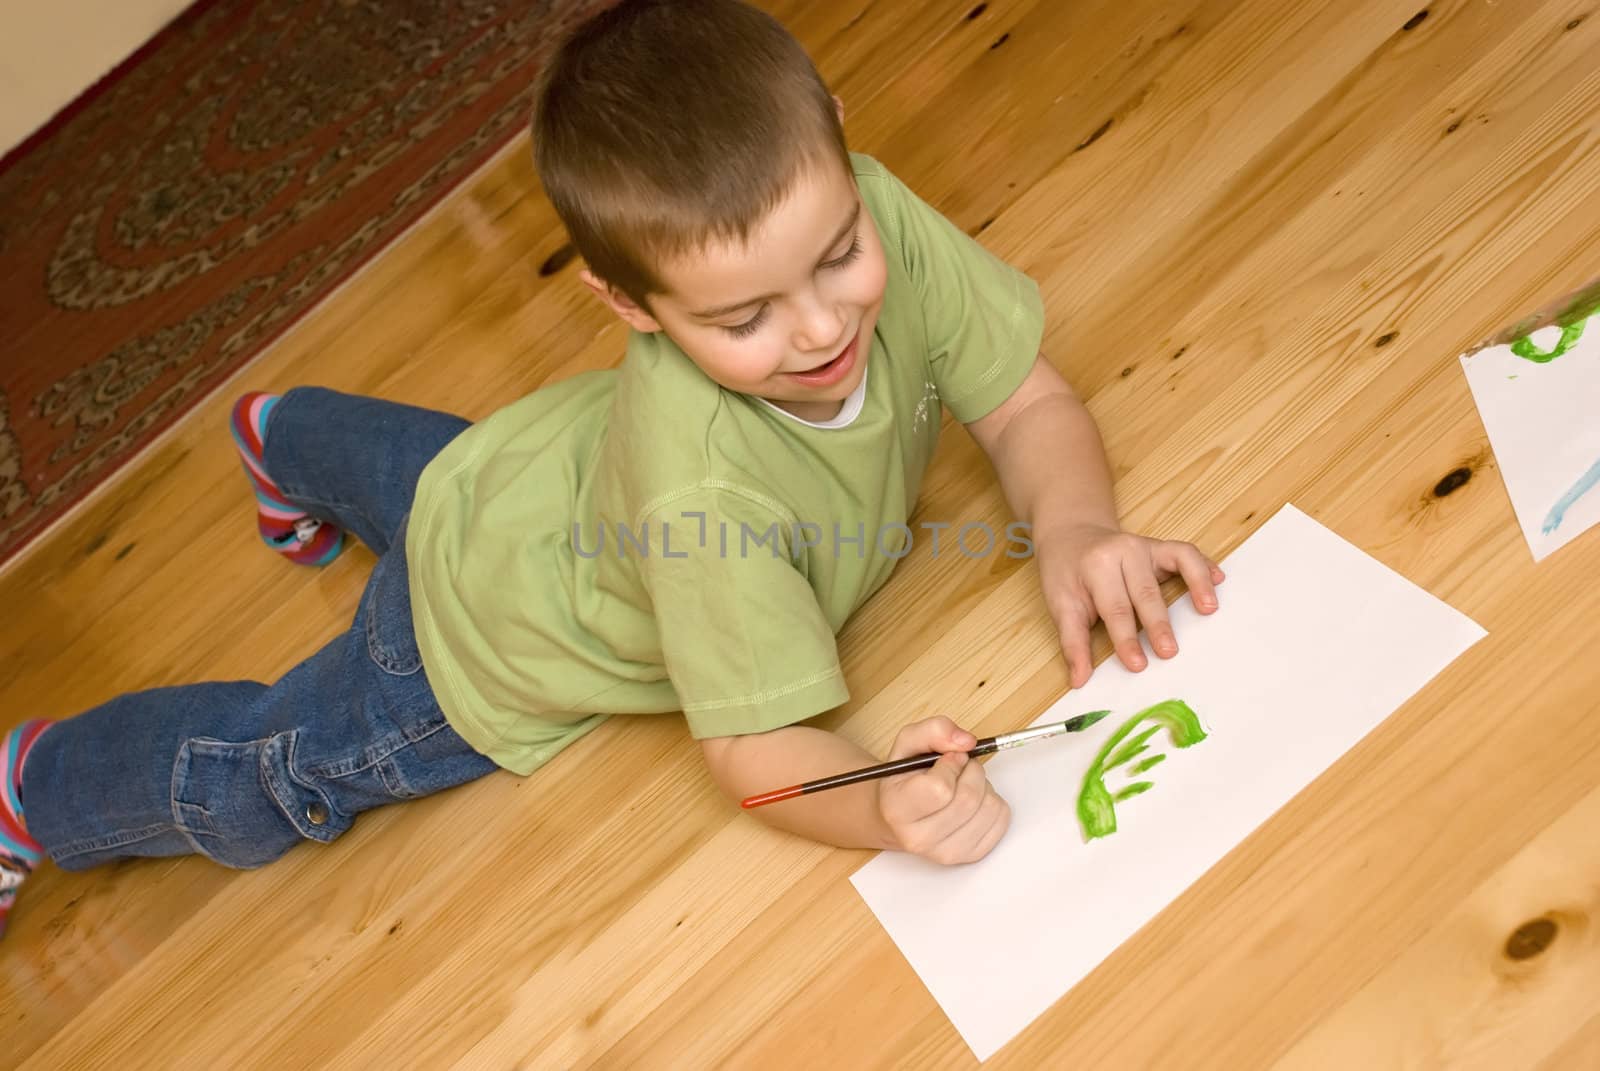 a boy is painting on the floor